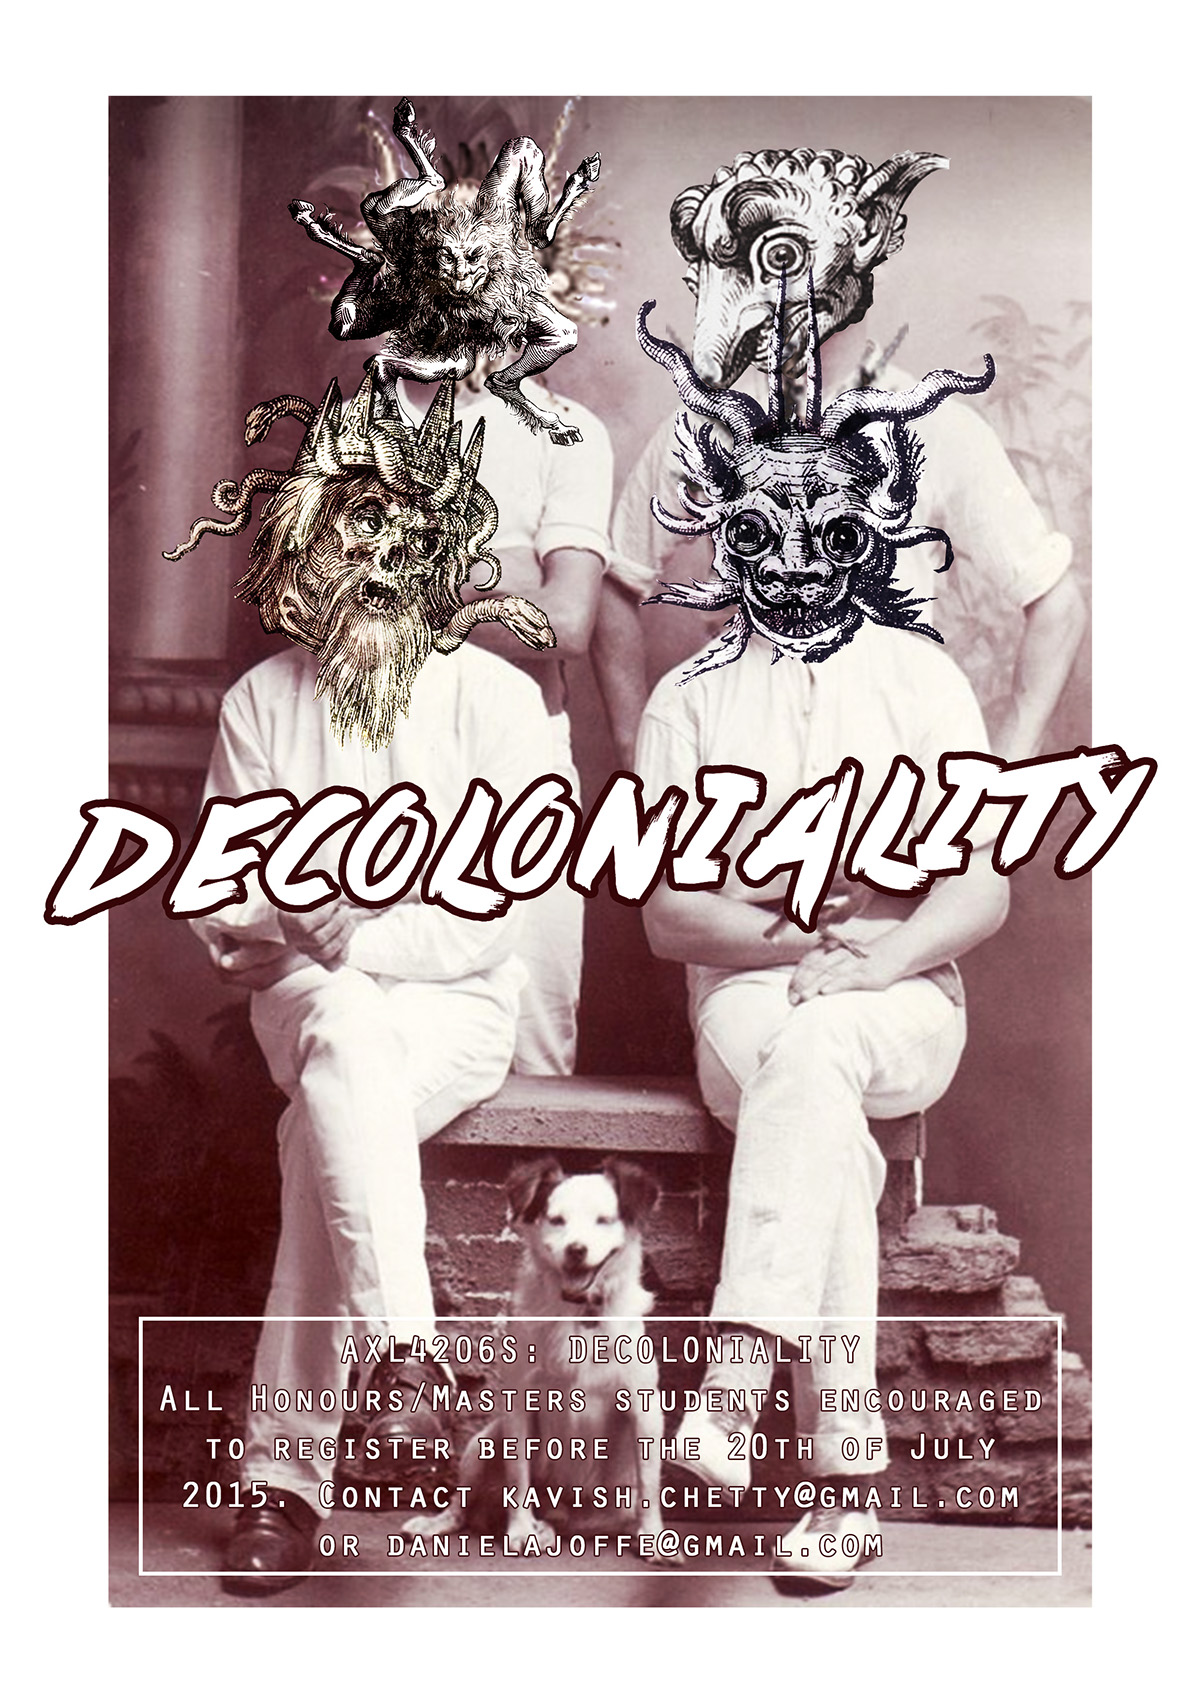 colonialism history Demons decoloniality uct